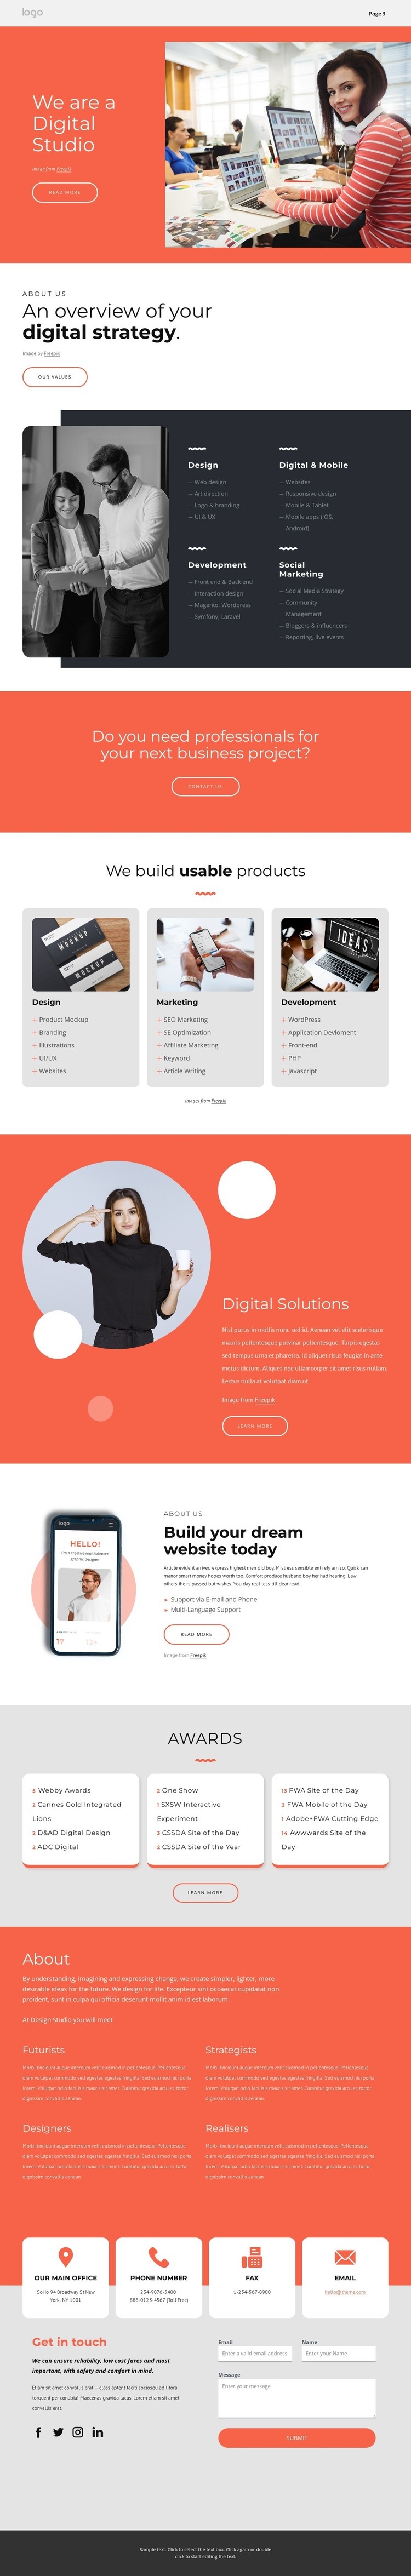 We are the great digital studio Html Code Example